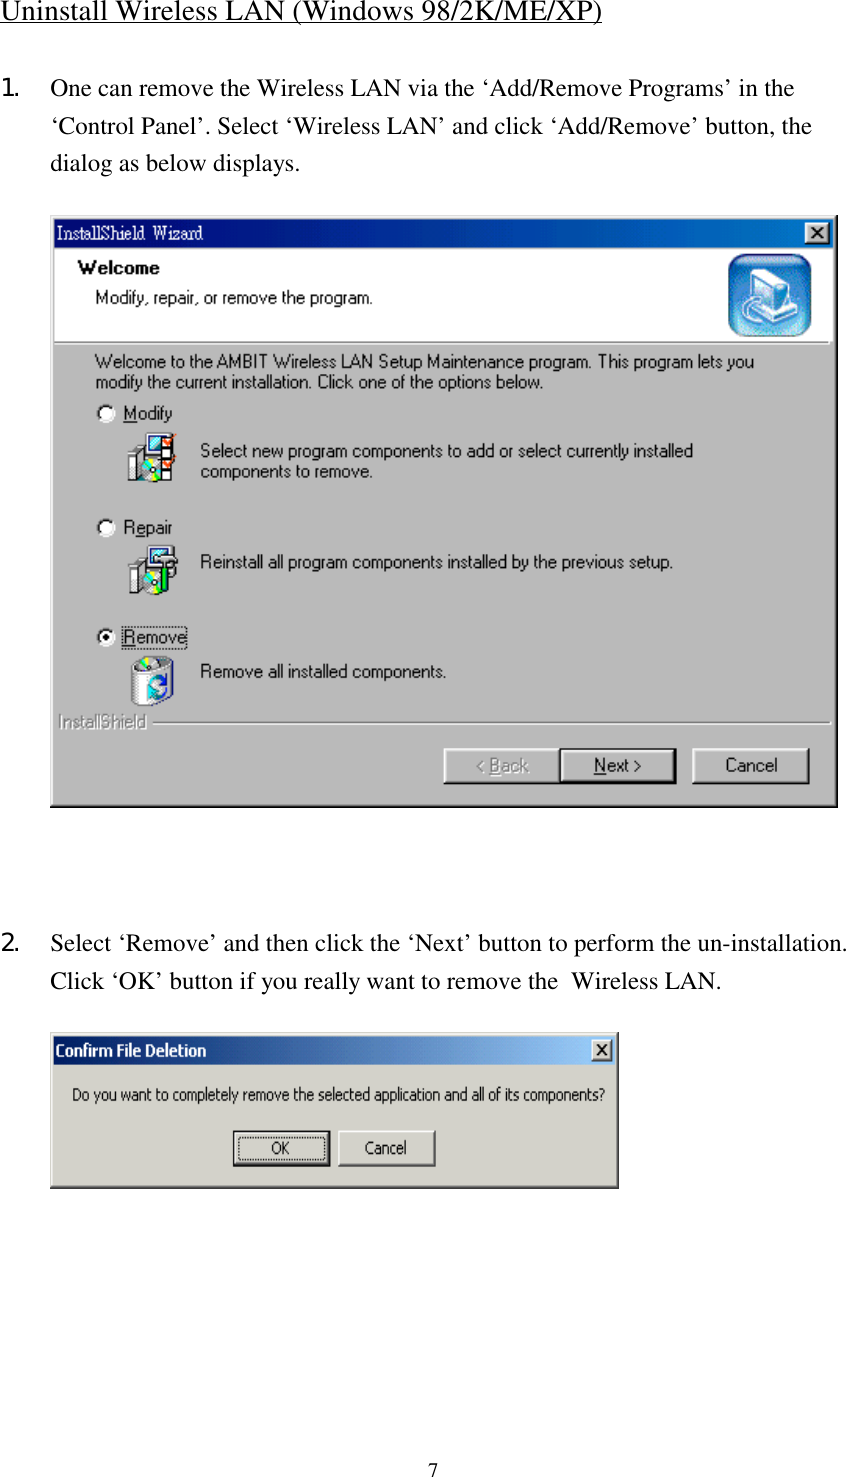 7Uninstall Wireless LAN (Windows 98/2K/ME/XP)1. One can remove the Wireless LAN via the ‘Add/Remove Programs’ in the‘Control Panel’. Select ‘Wireless LAN’ and click ‘Add/Remove’ button, thedialog as below displays.2. Select ‘Remove’ and then click the ‘Next’ button to perform the un-installation.Click ‘OK’ button if you really want to remove the  Wireless LAN.